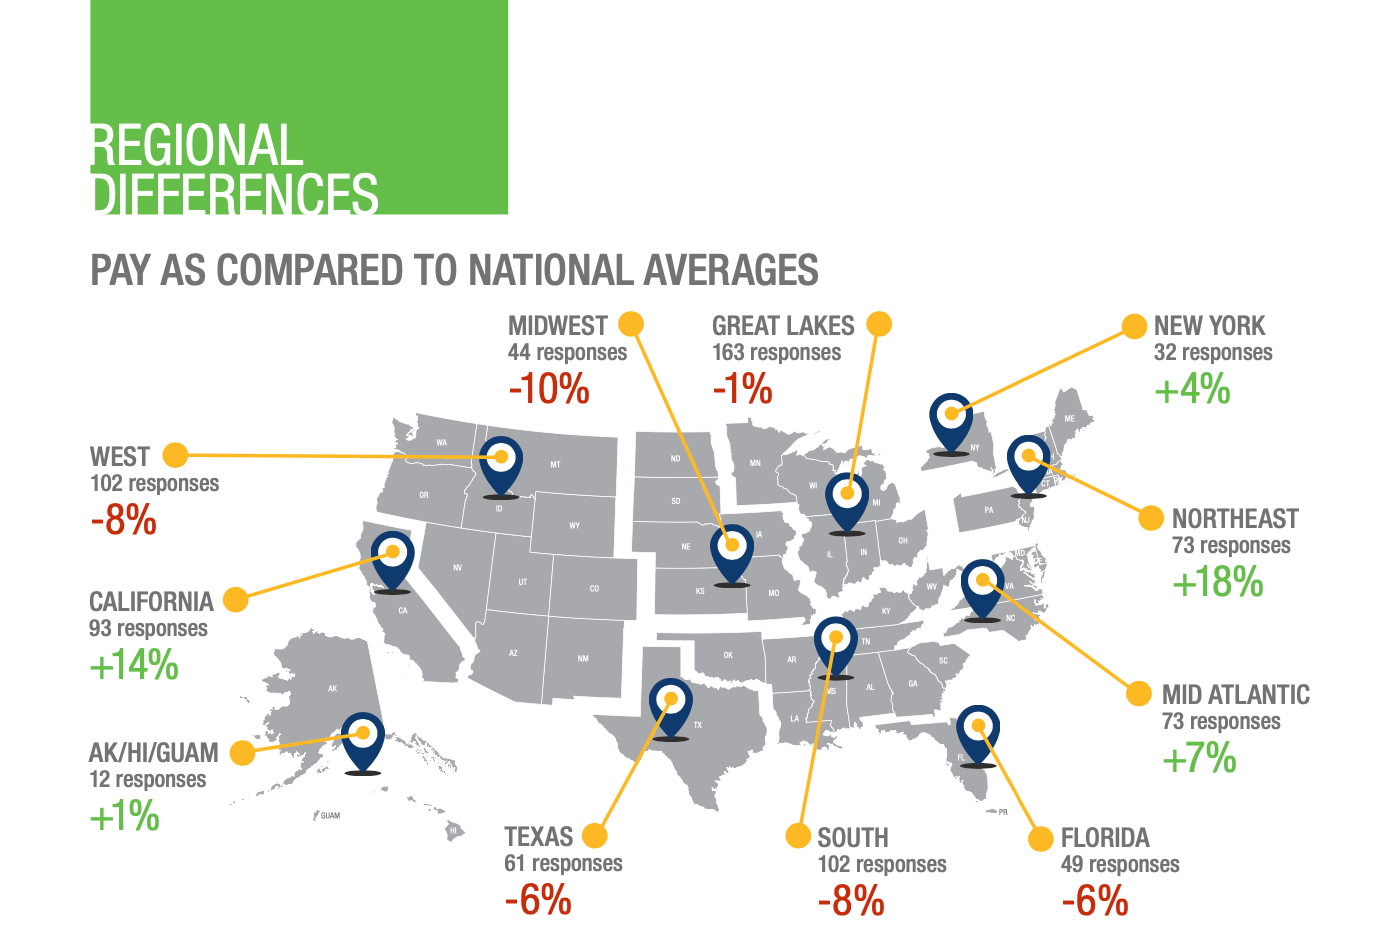 Regional Network and Cable Job Pay Compared to National Averages